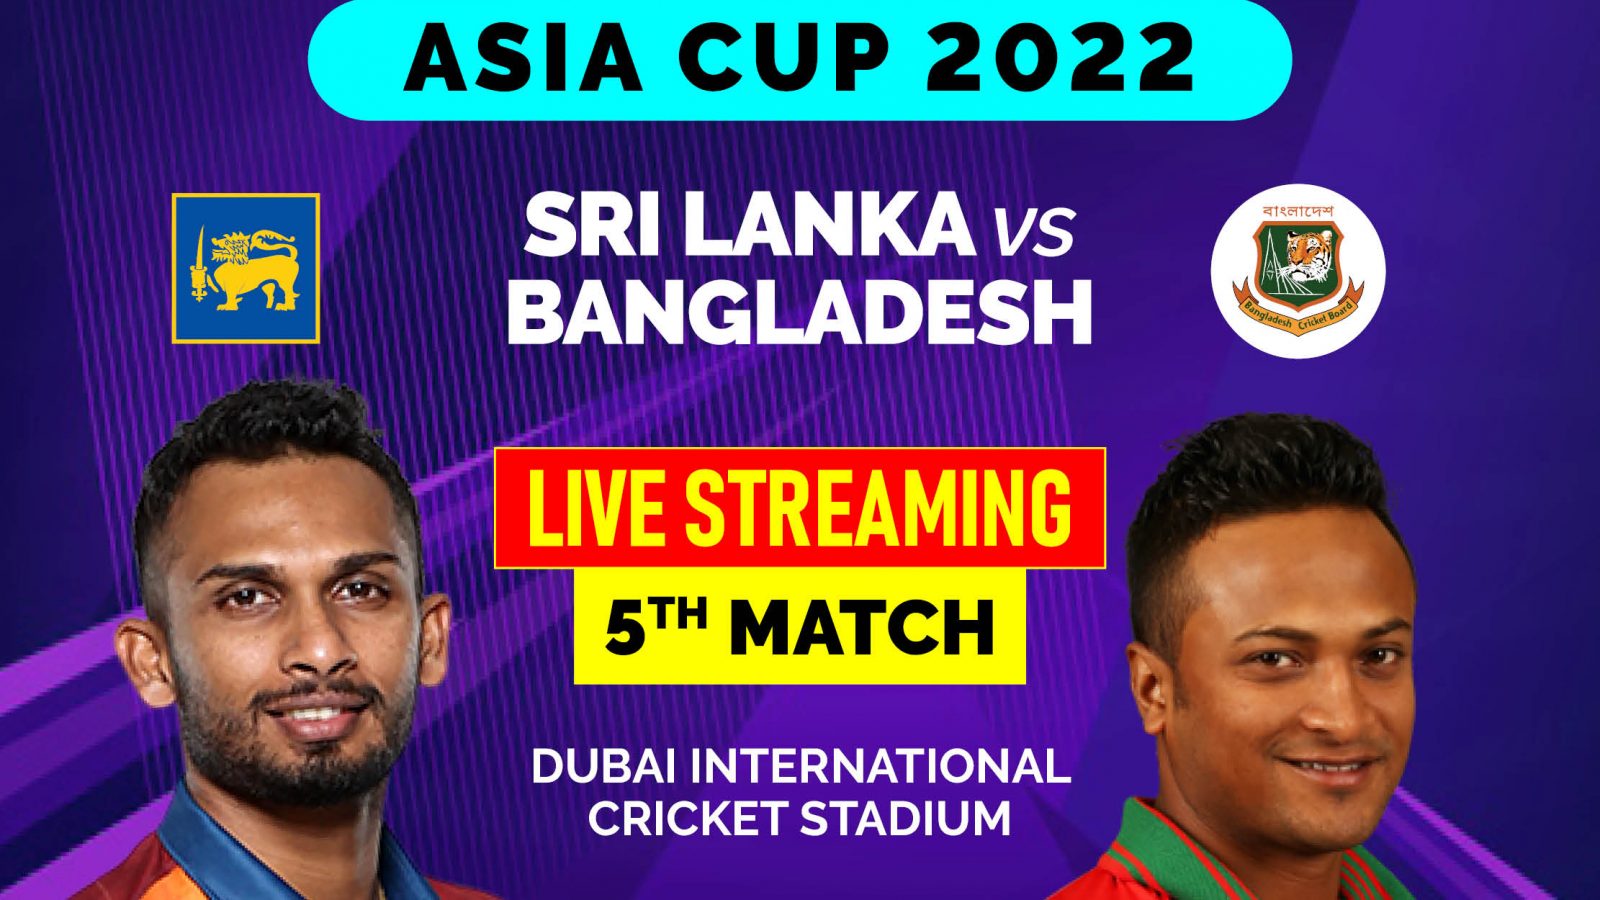 Sri Lanka vs Bangladesh Live Streaming Cricket When and Where to Watch Asia Cup 2022 Match